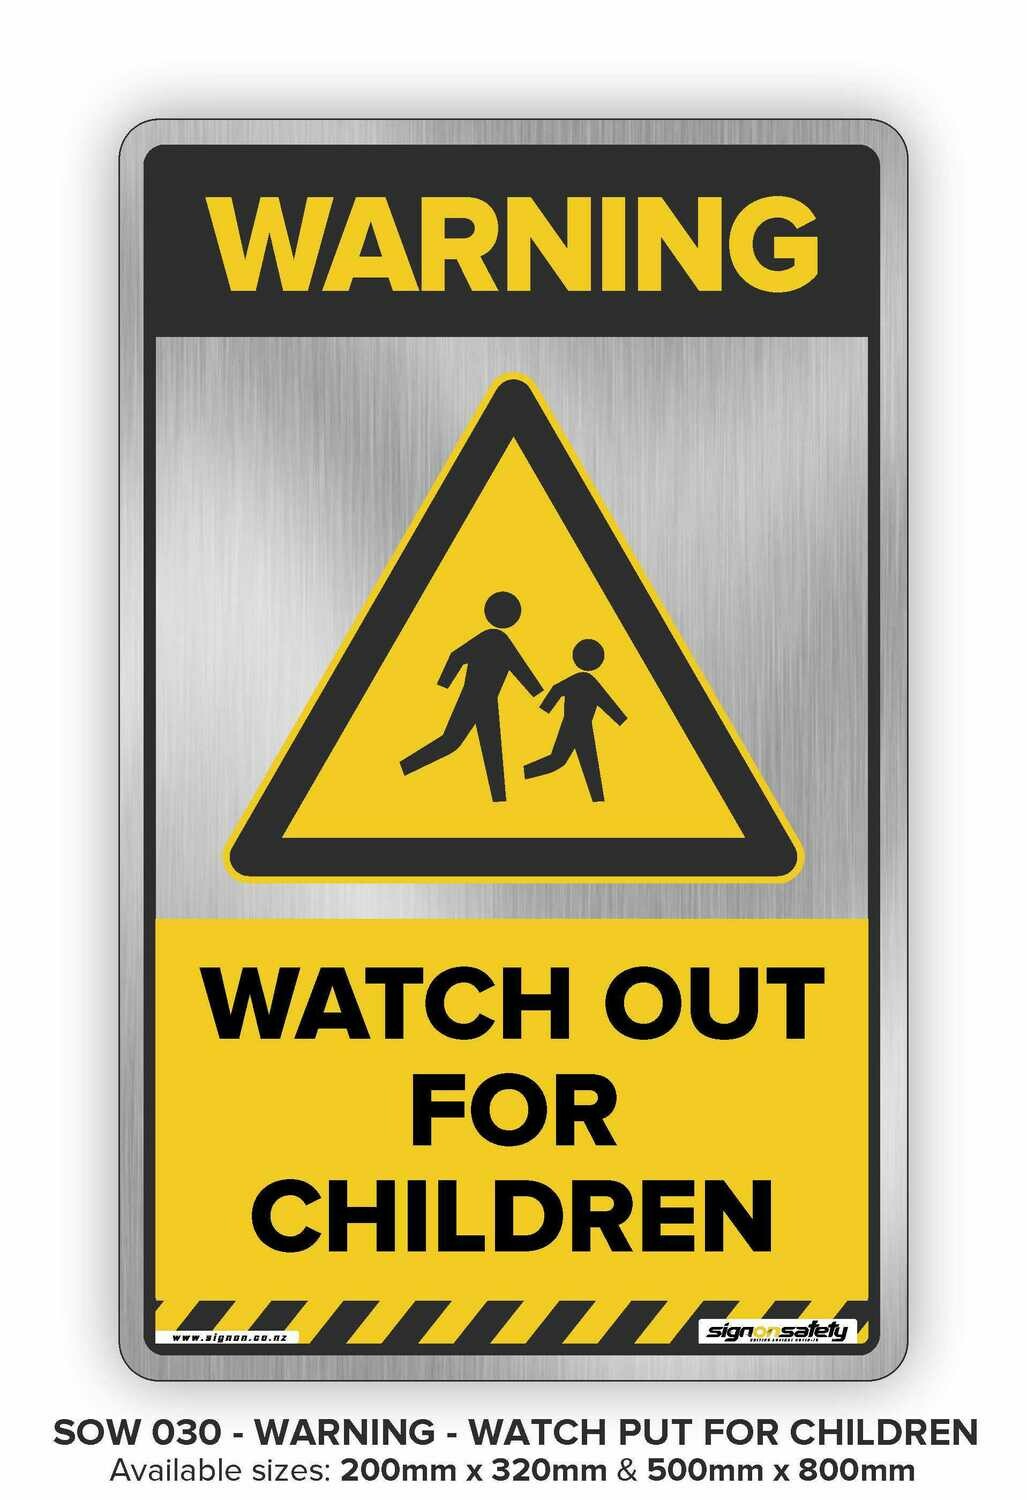 Warning - Watch Out For Children